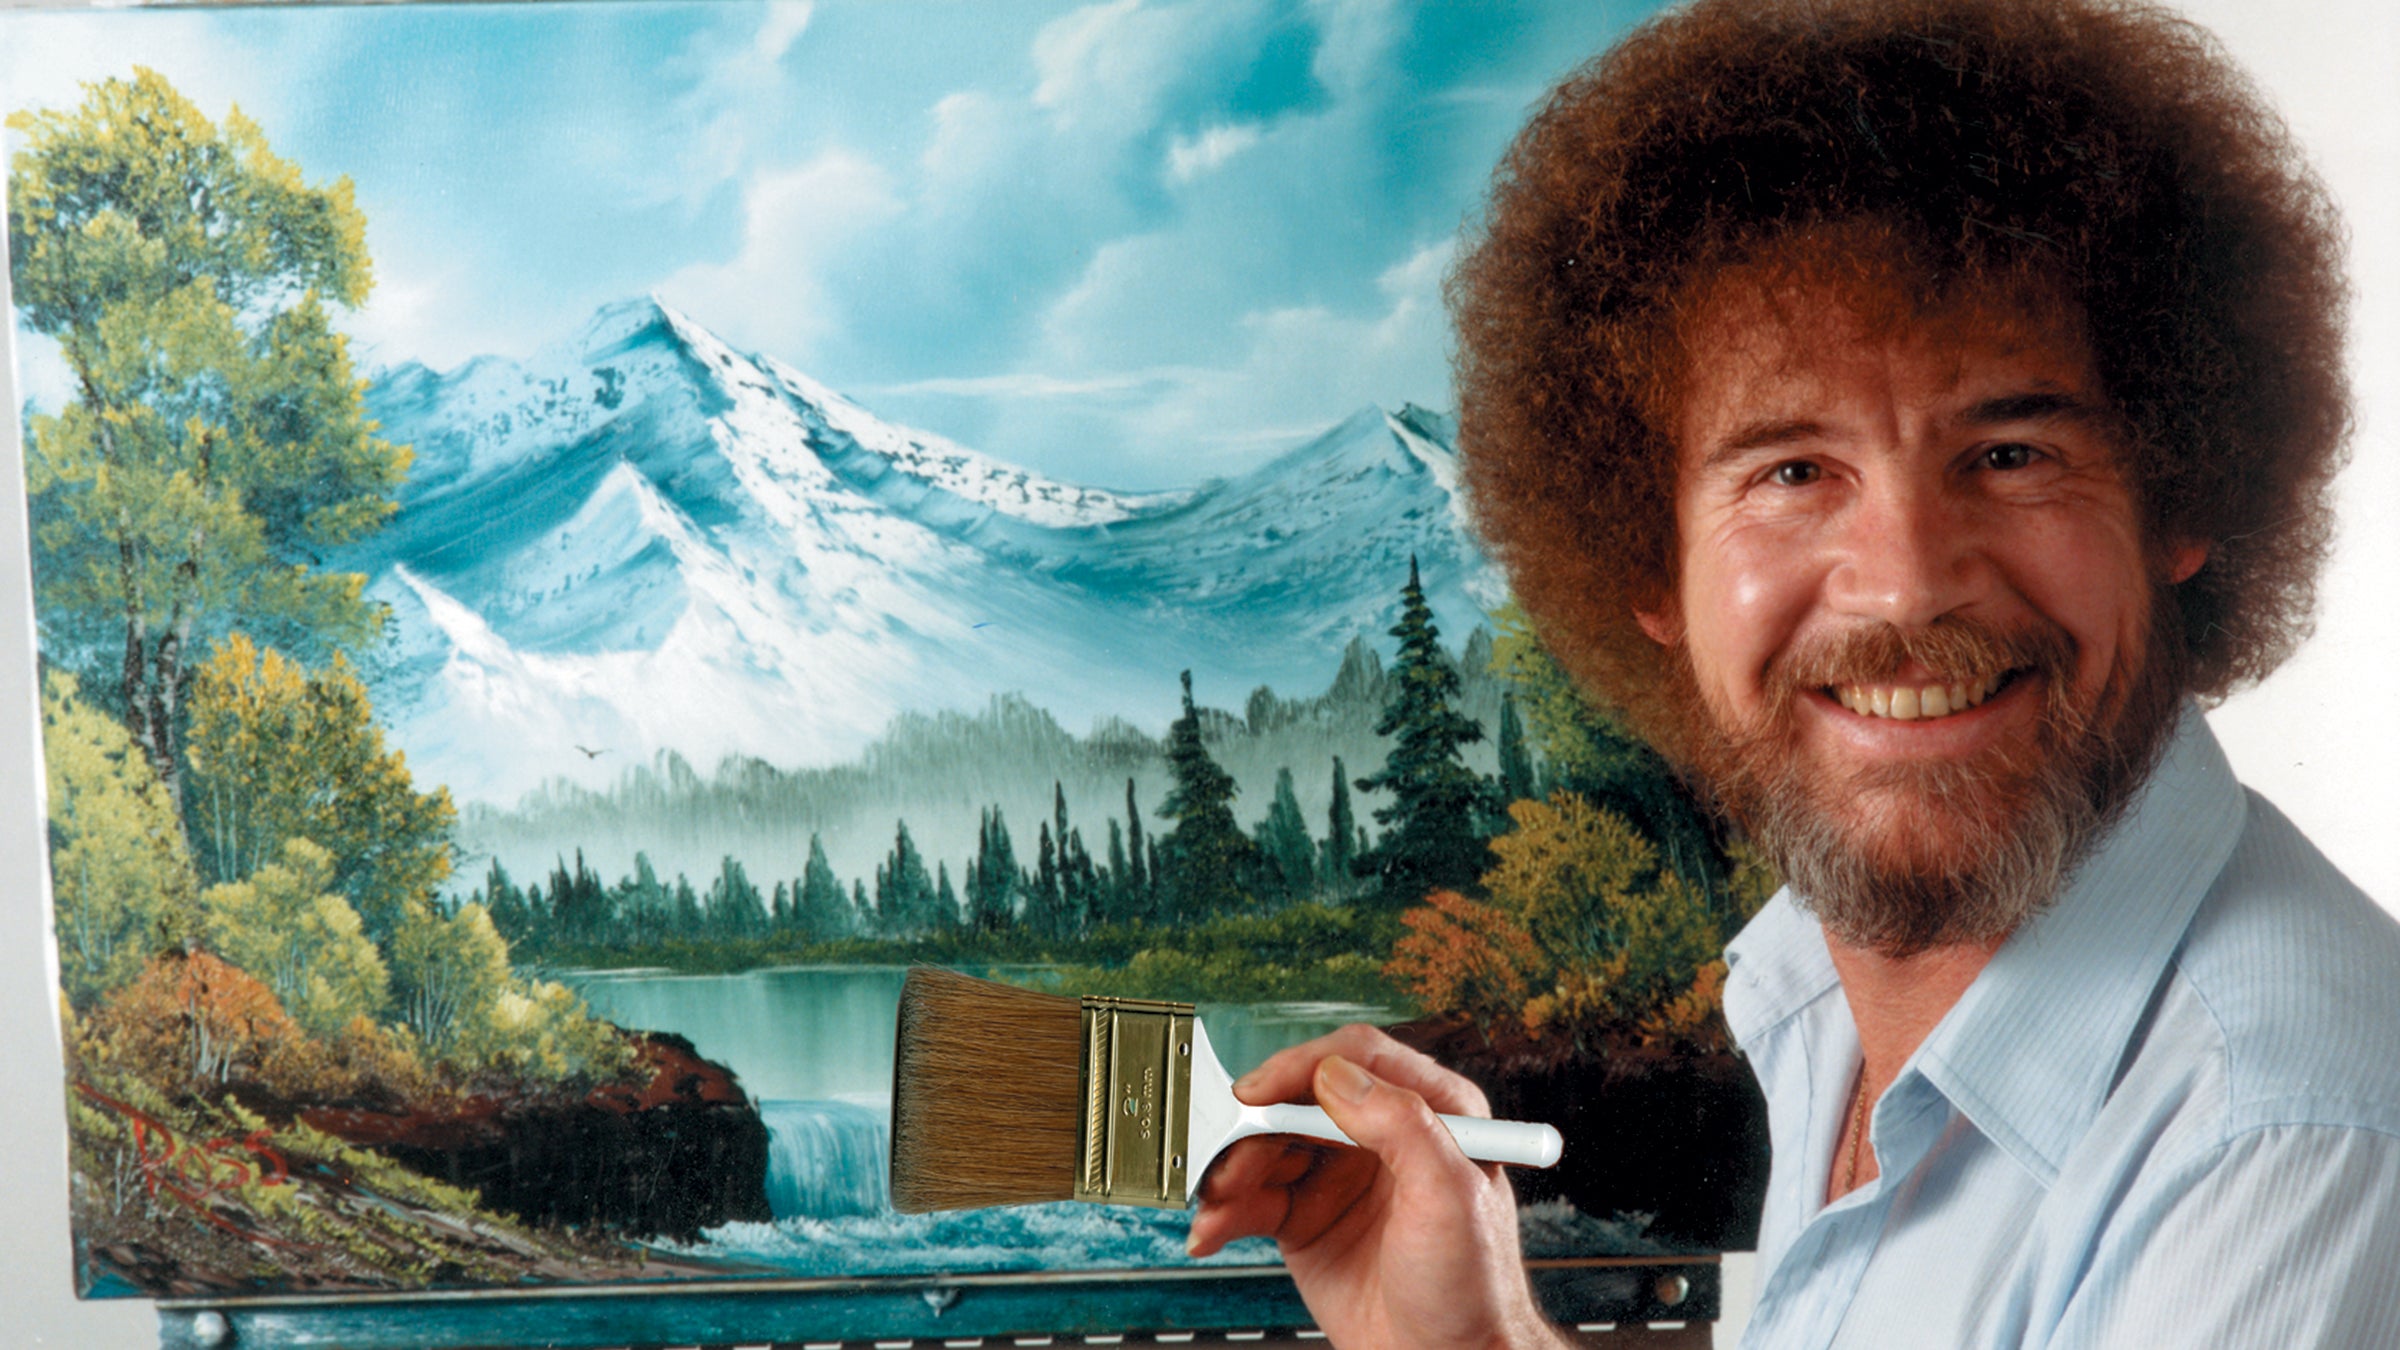 Bob Ross by the Numbers [Book]